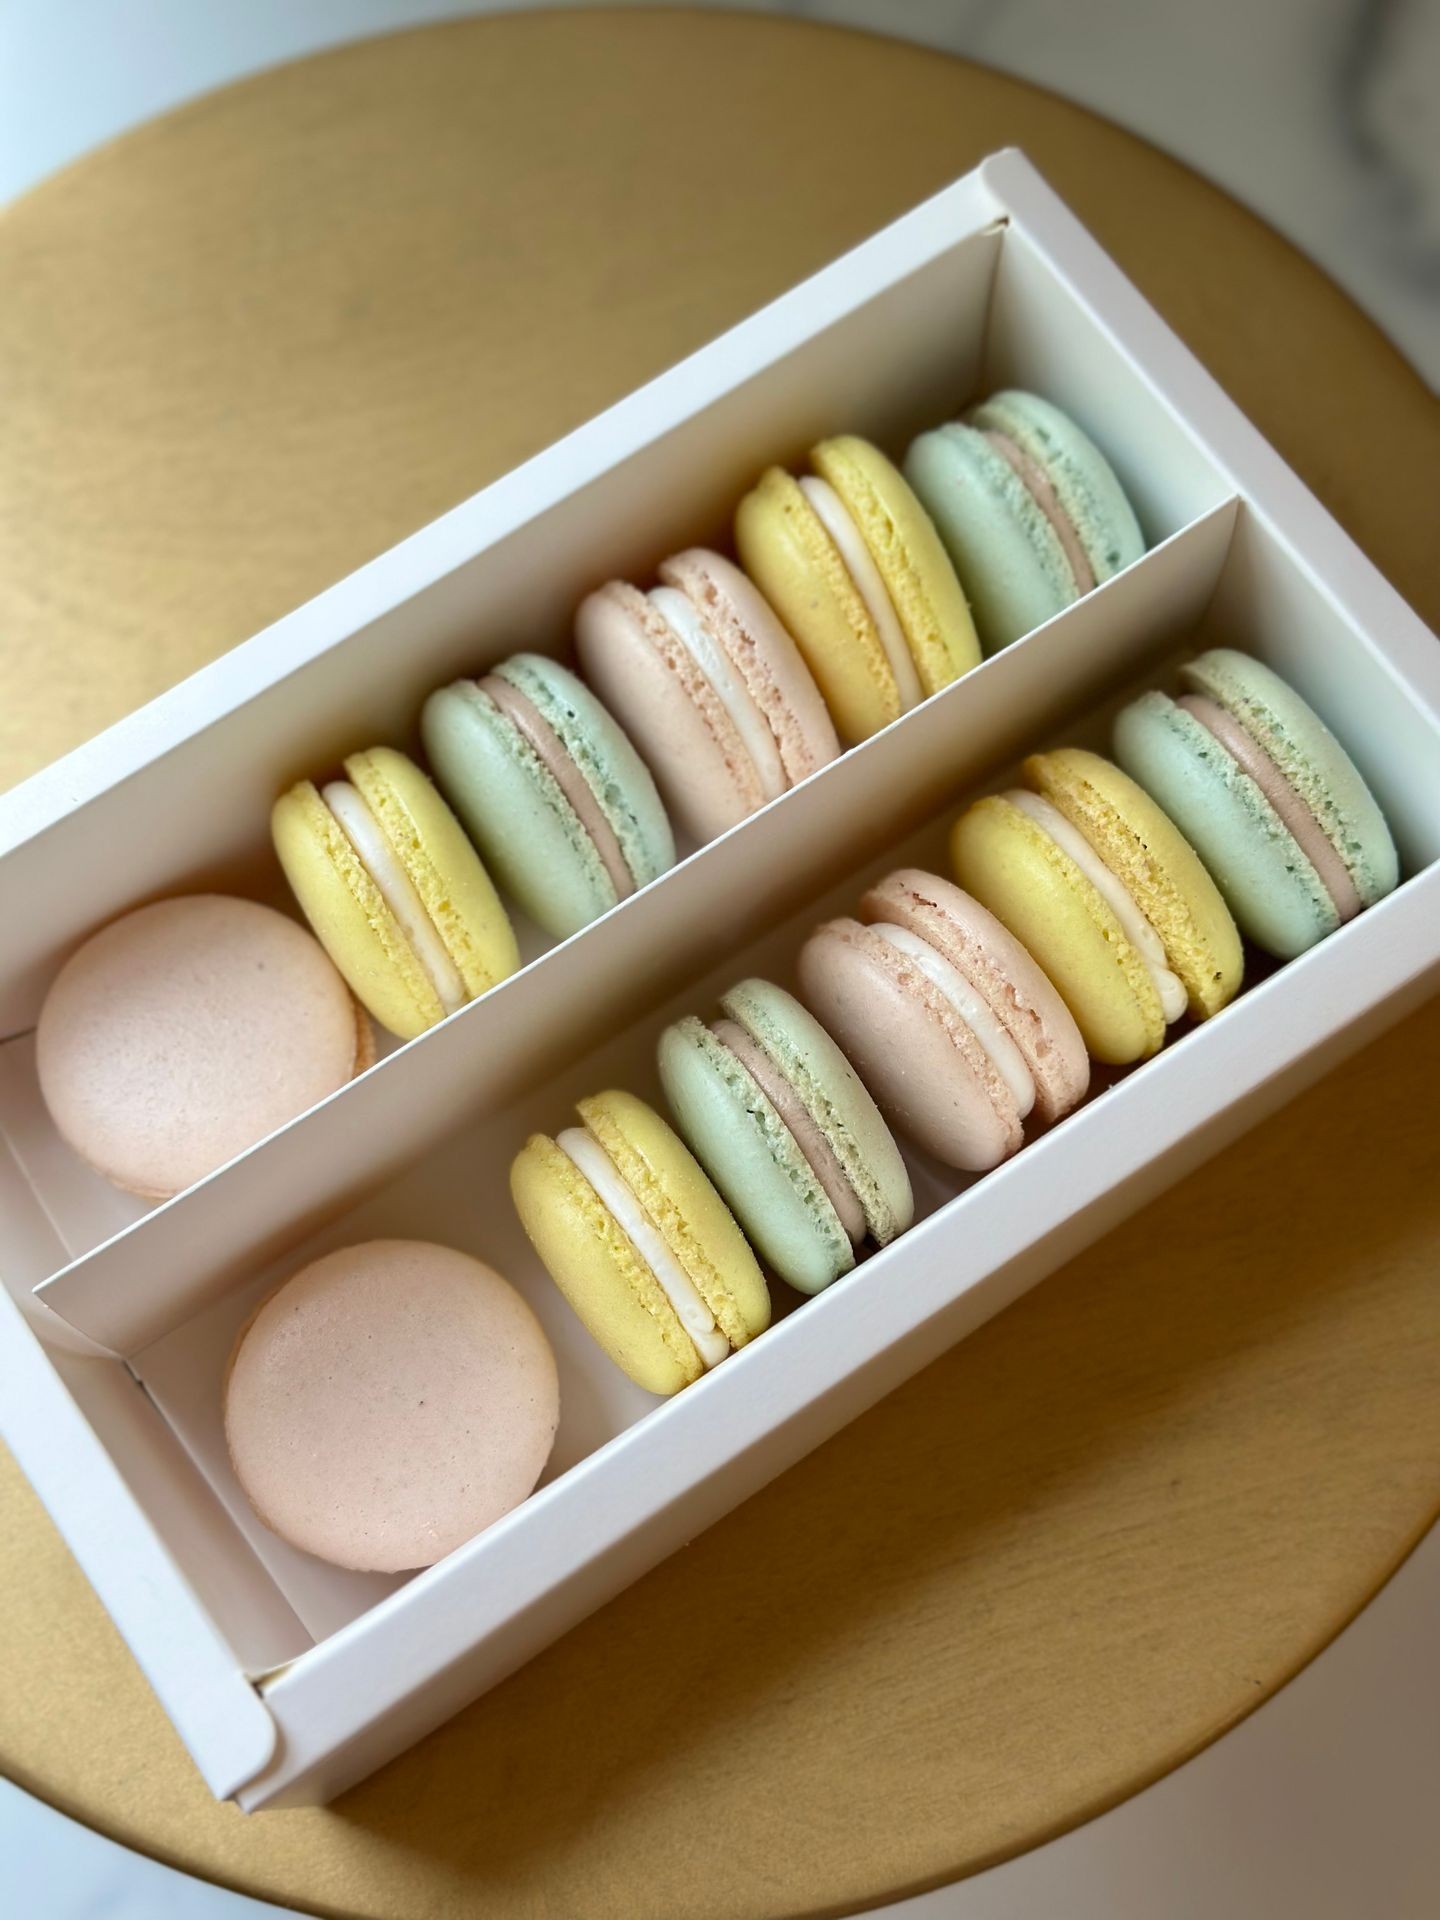 Pastel French macarons in a white gift box